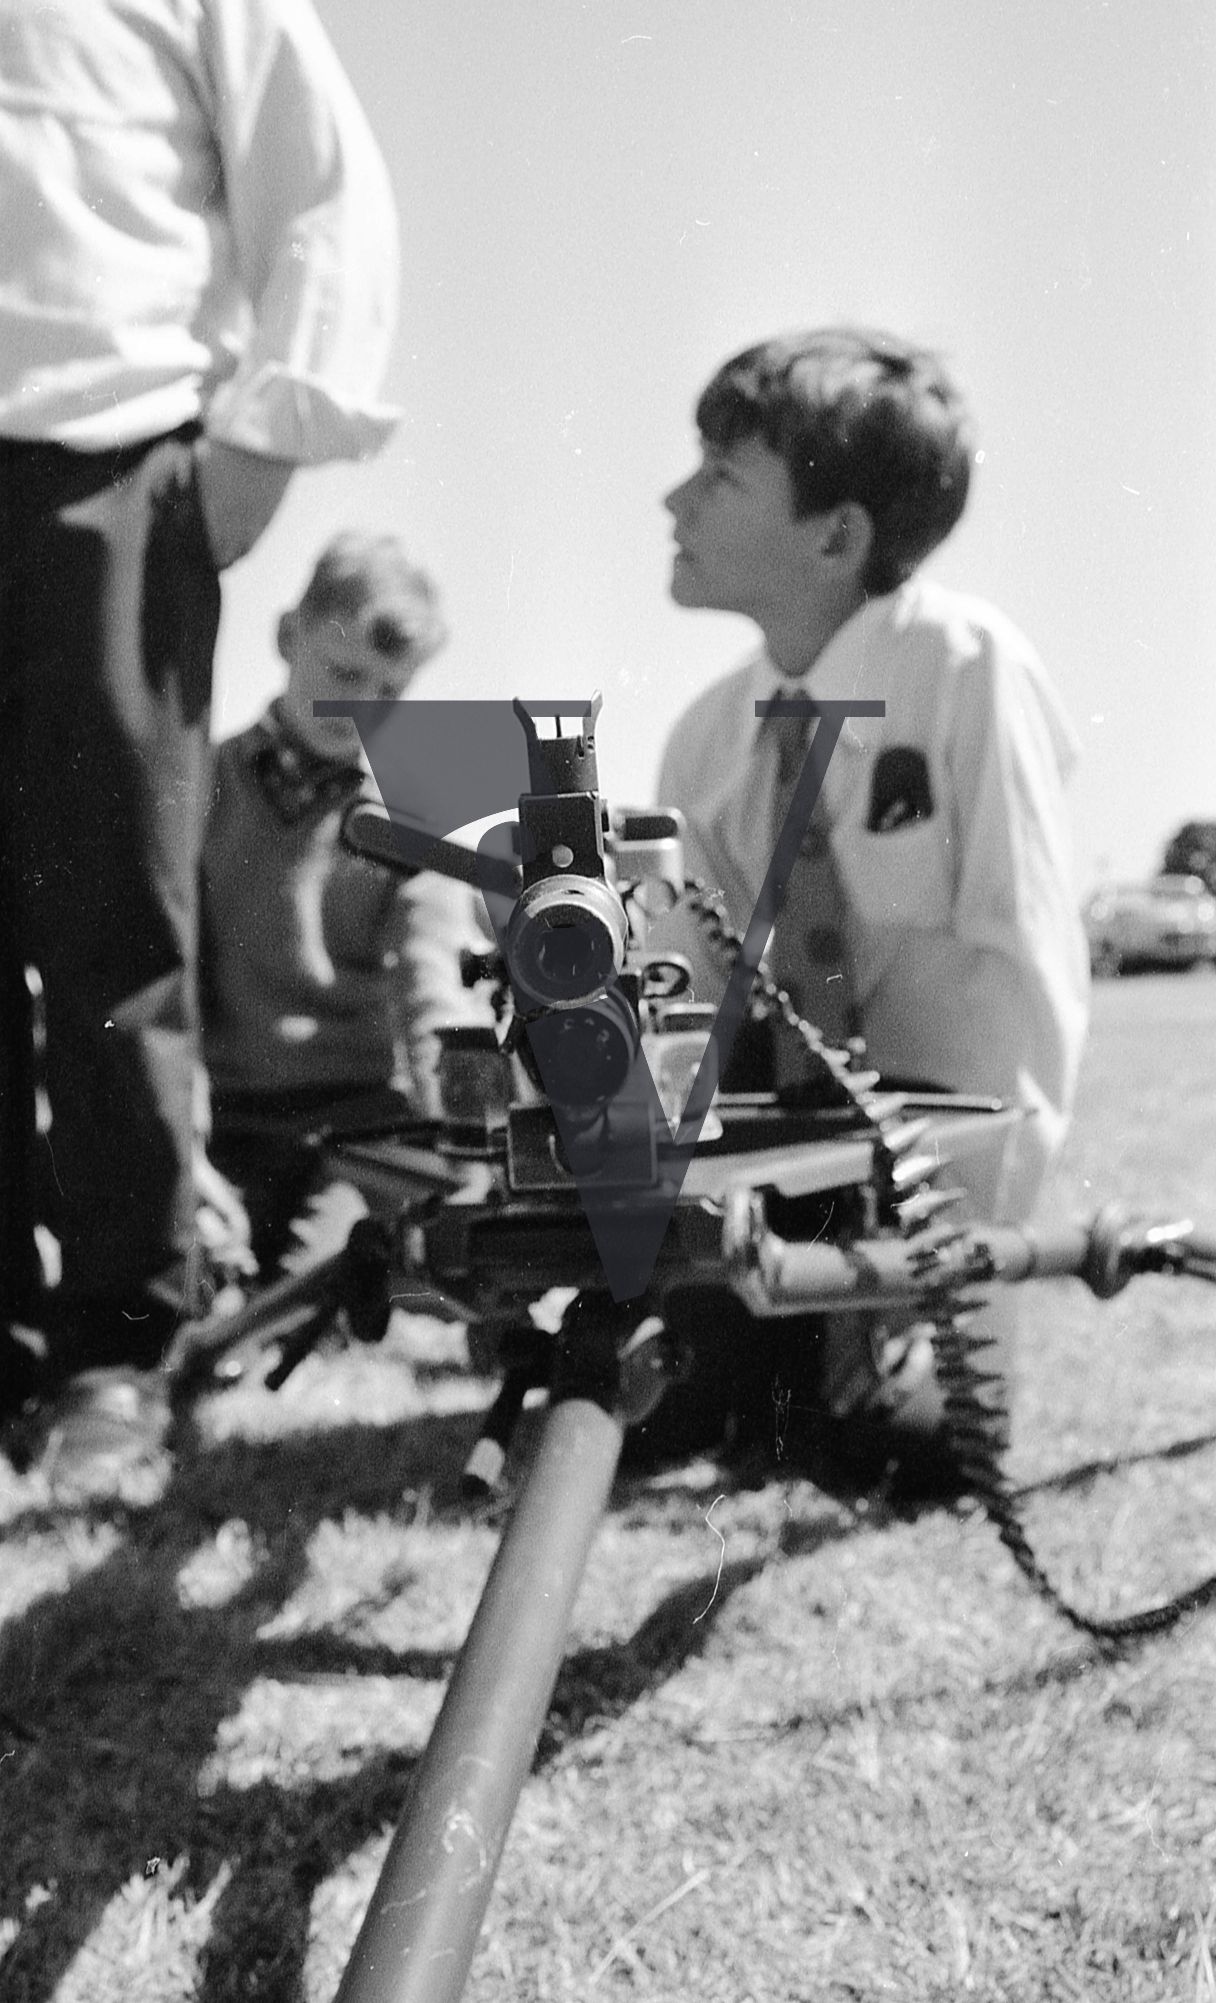 Rhodesia, Rhodesian Light Infantry, passing out ceremony, young boys with tripod mounted FN MAG general purpose machine gun.